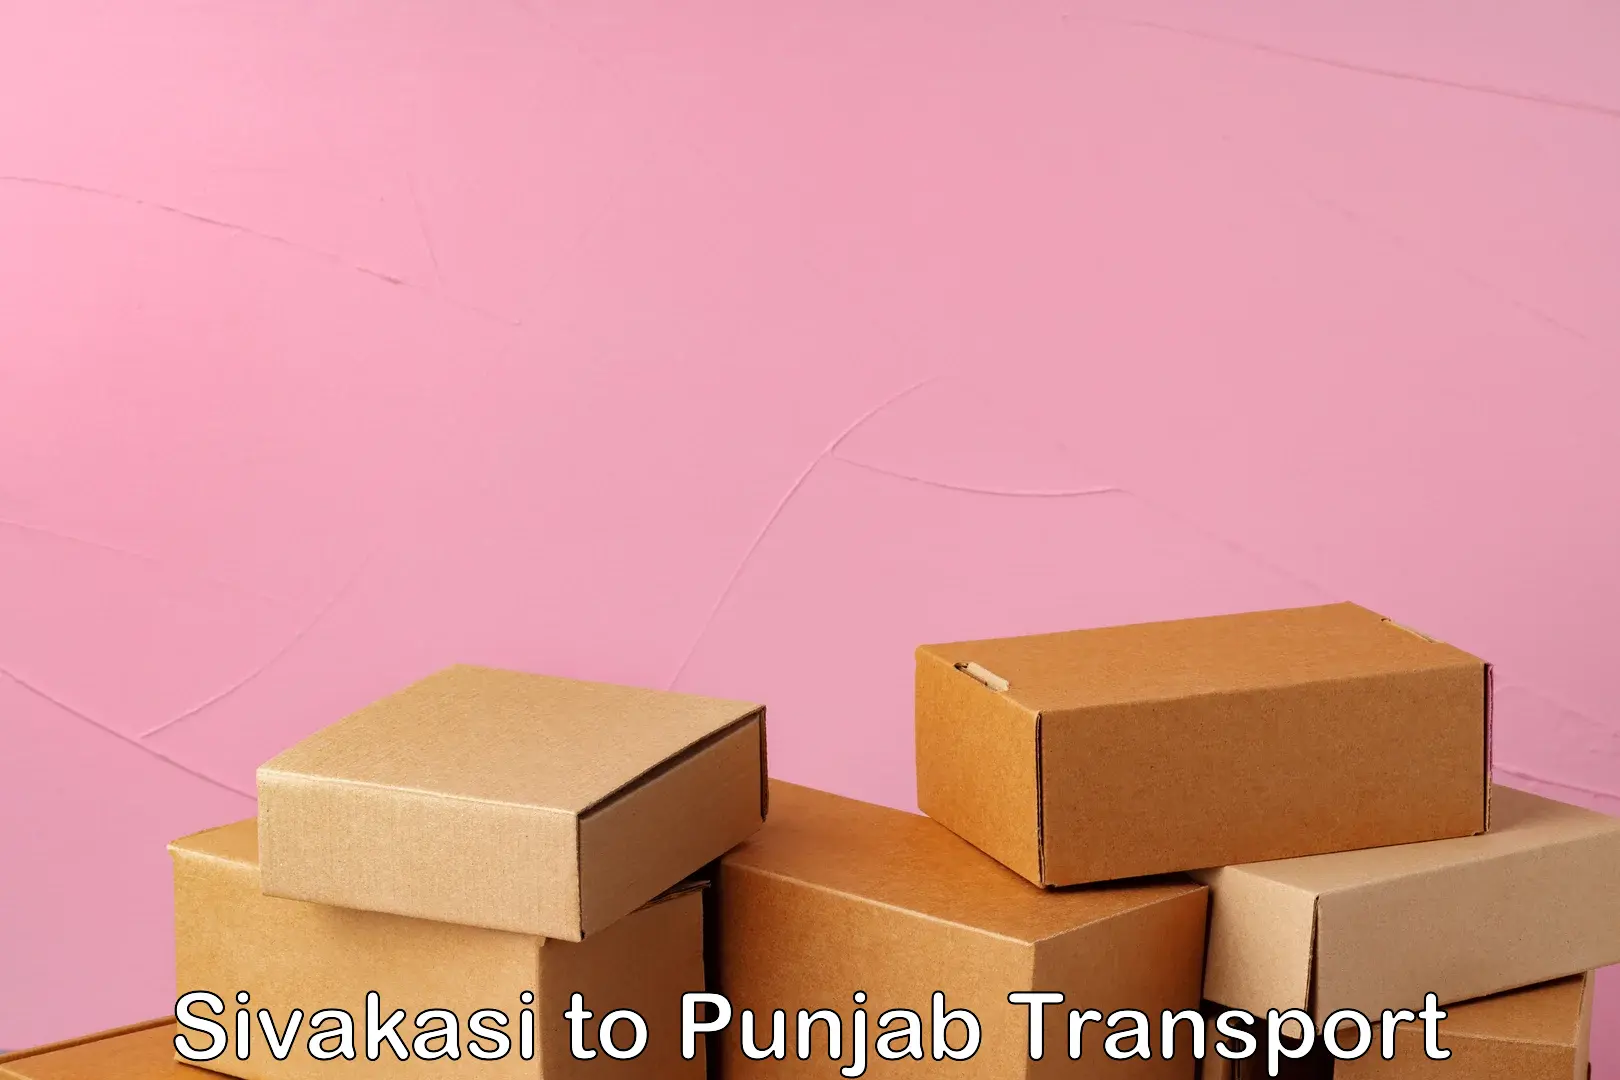 Road transport online services Sivakasi to Amritsar